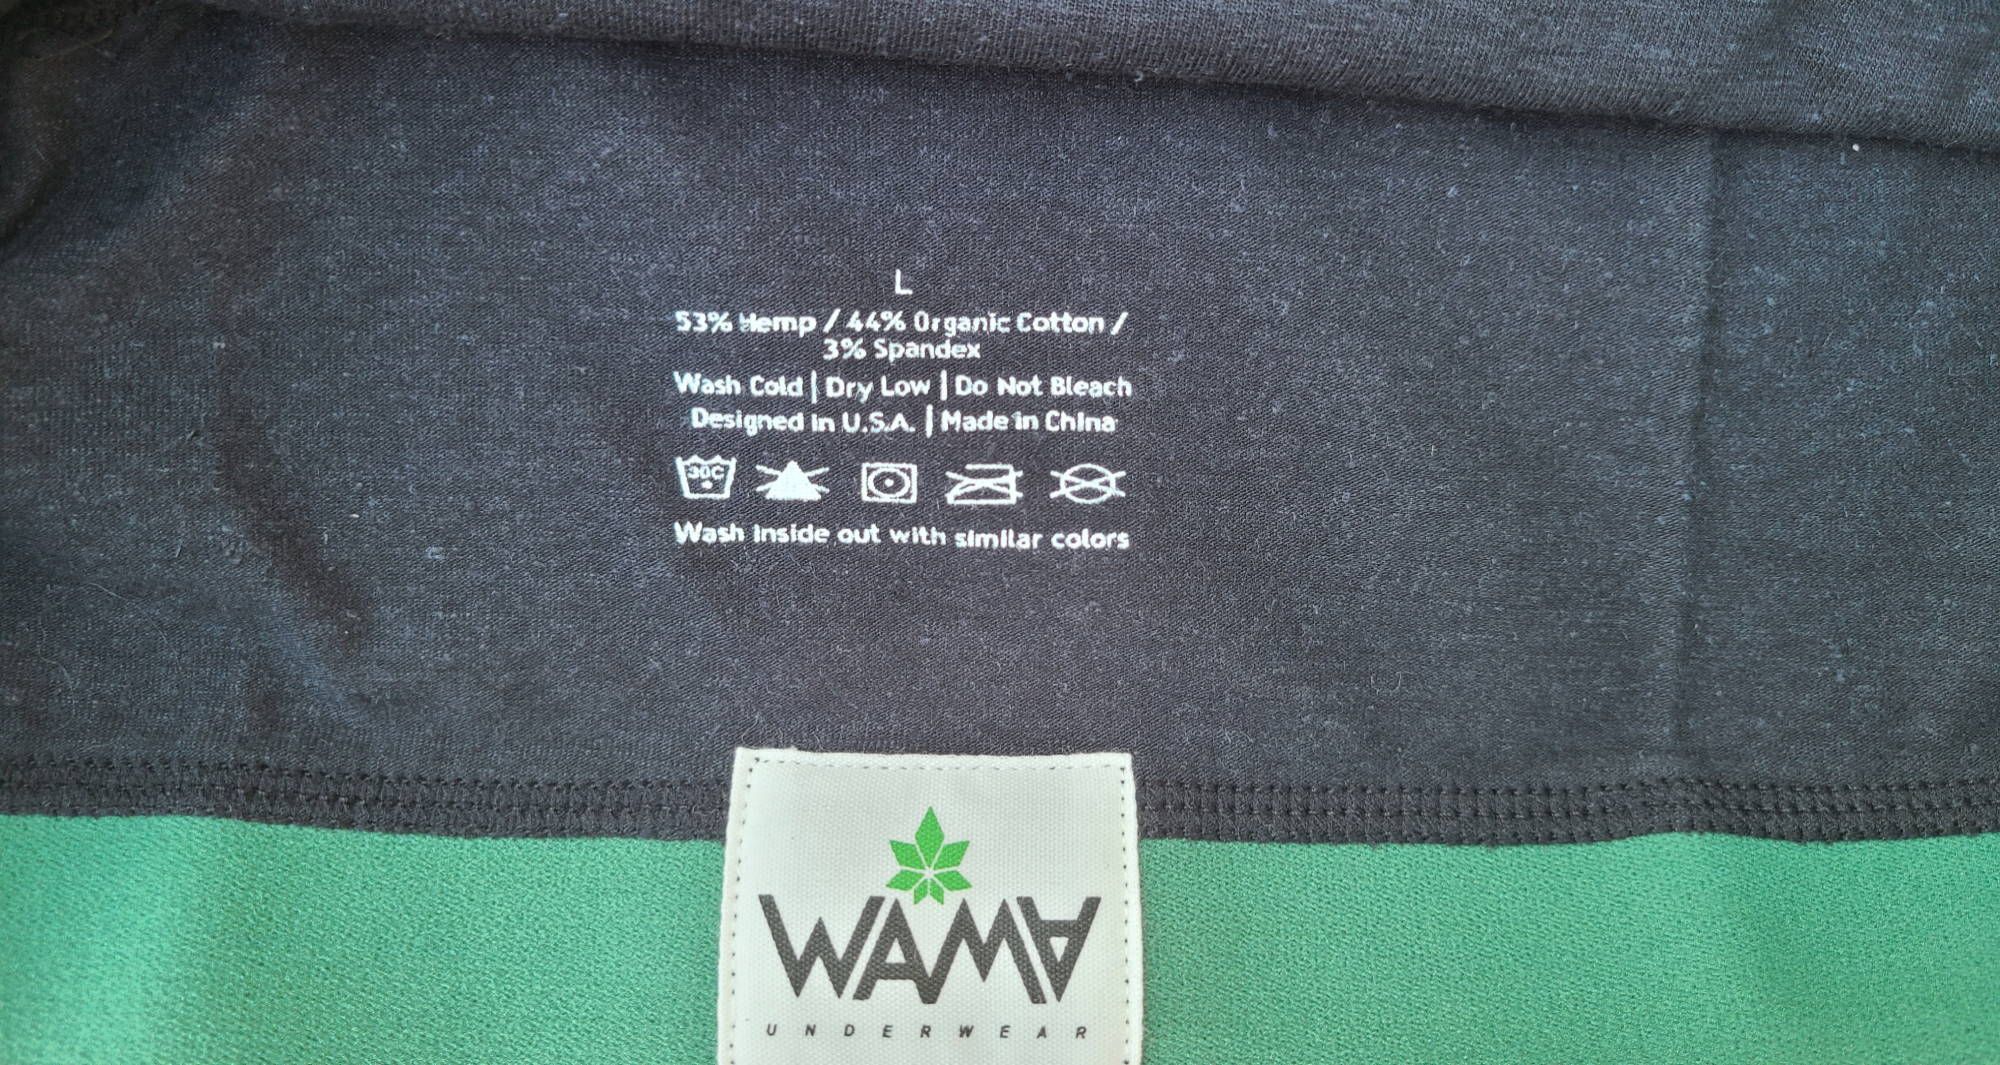 The inside of a WAMA hemp bra shows the fabric content and washing instructions.